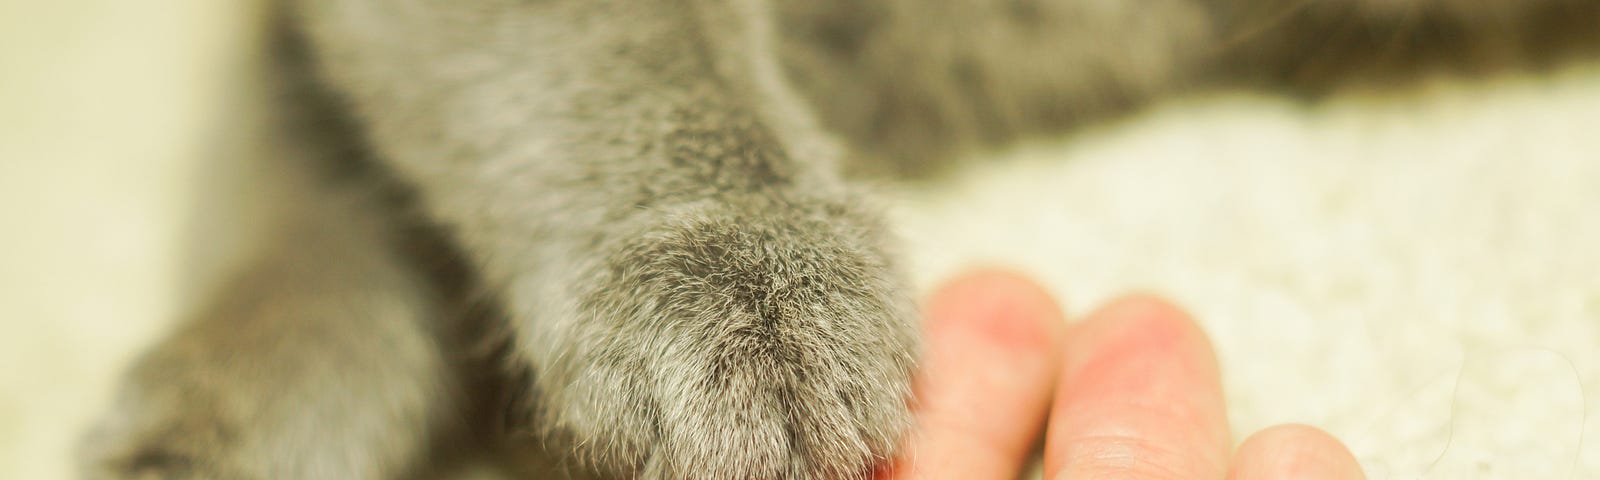 A gray cat placing its paw on a woman’s hand. (grief, grandmother, cat, love)